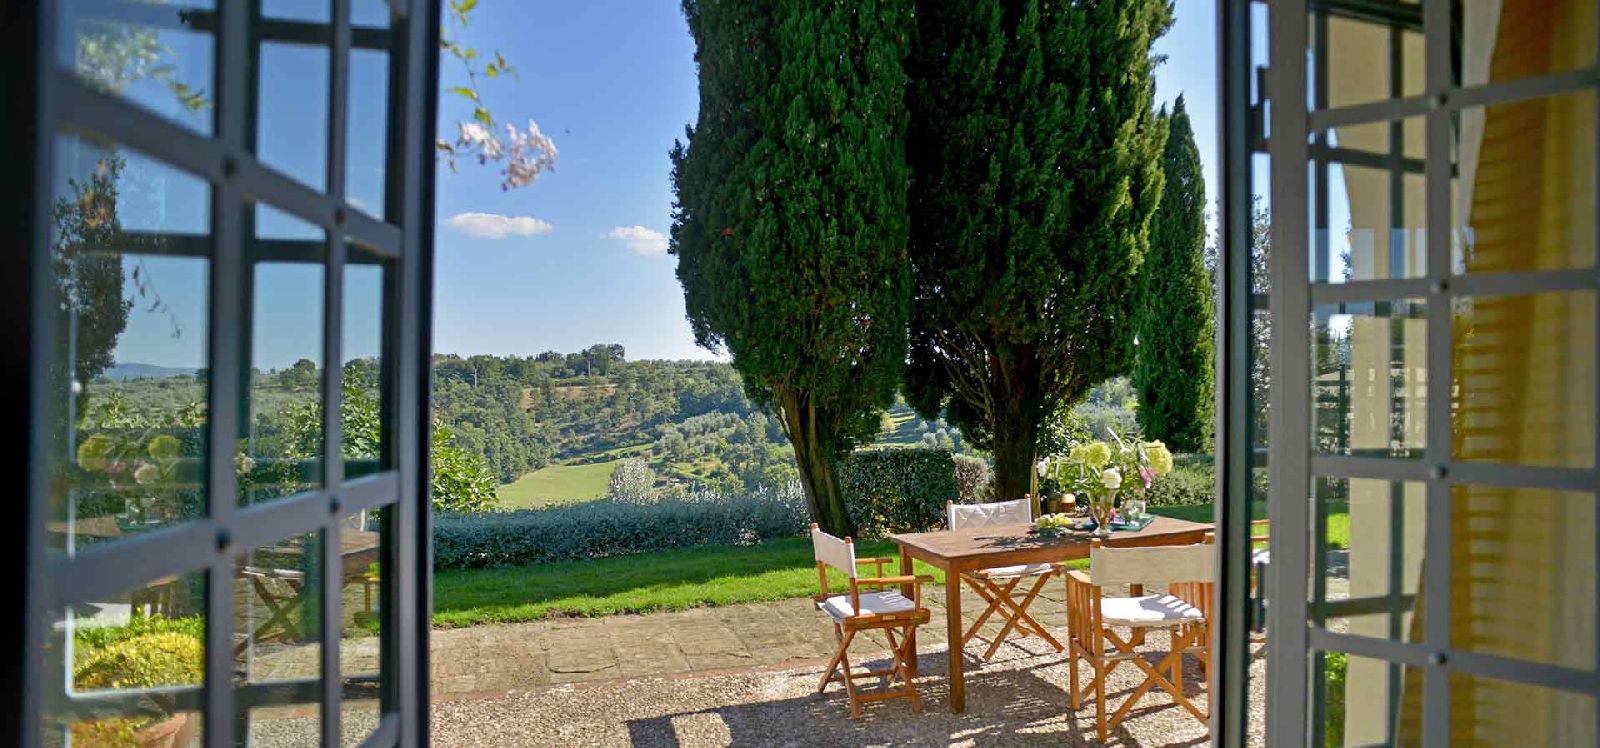 Views of the Tuscan hills from villa Oliveto in Italy